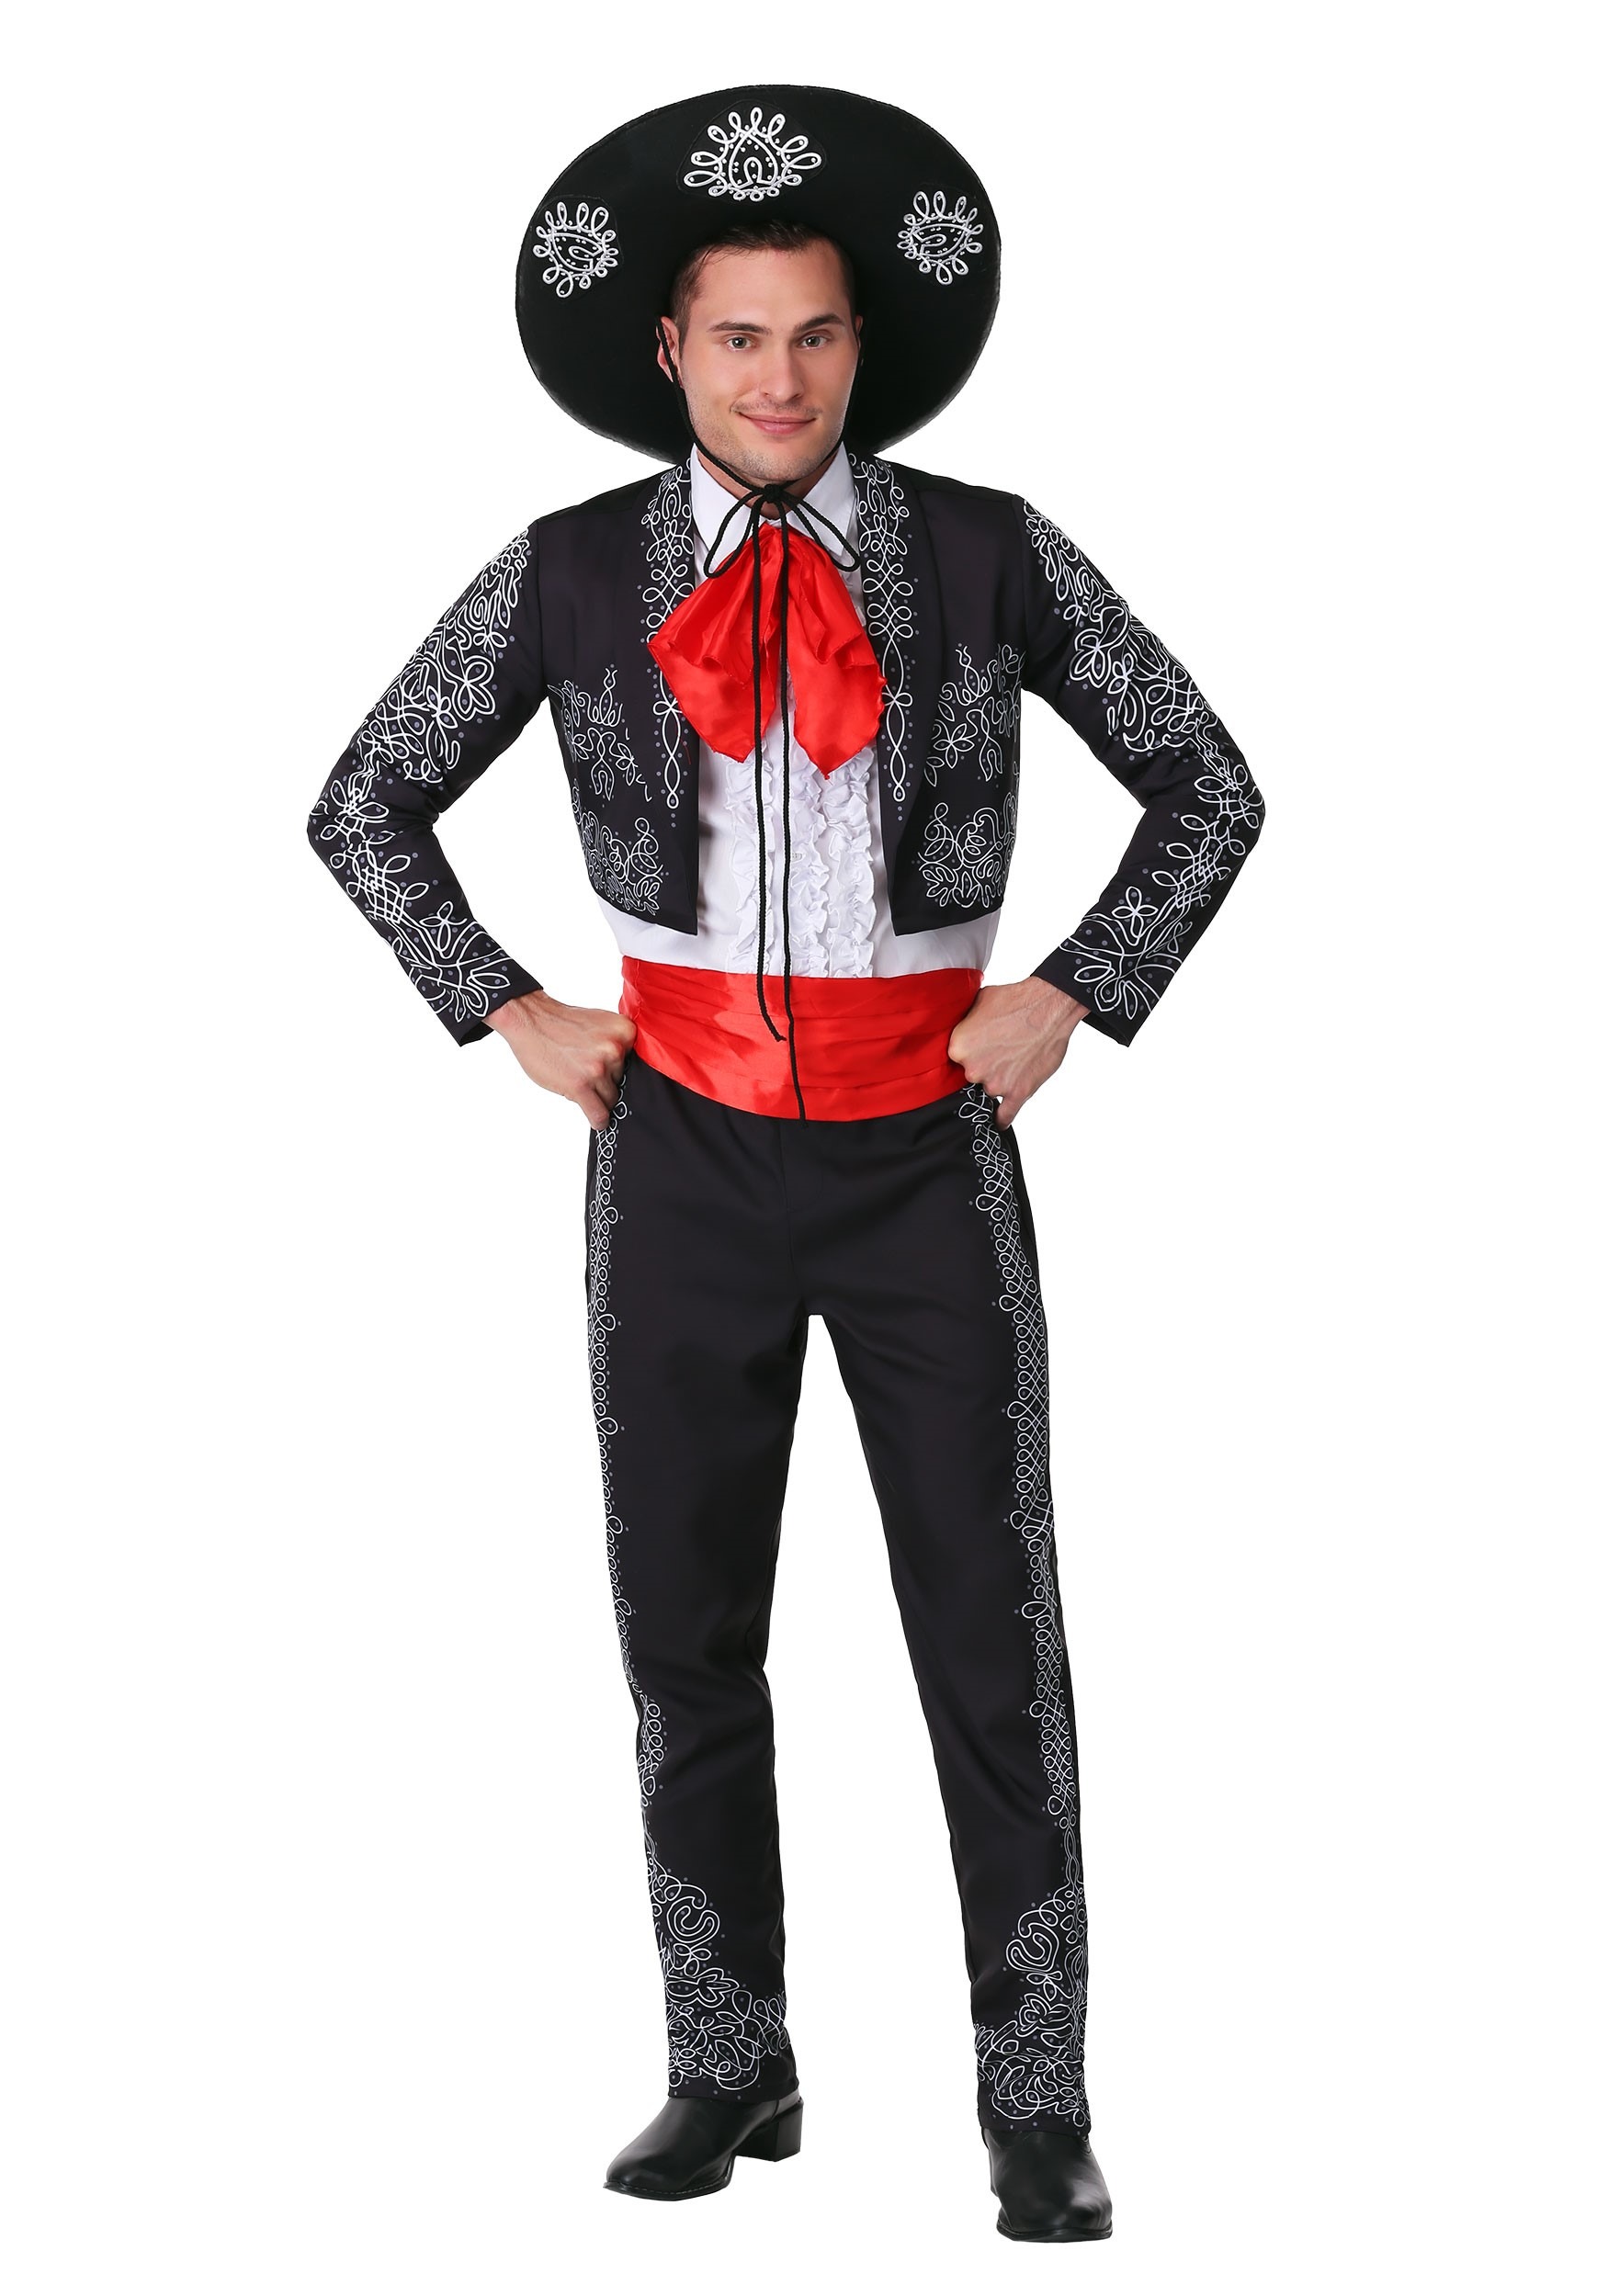 Photos - Fancy Dress FUN Costumes Adult The Three Amigos Costume | Adult Costumes Black/Red